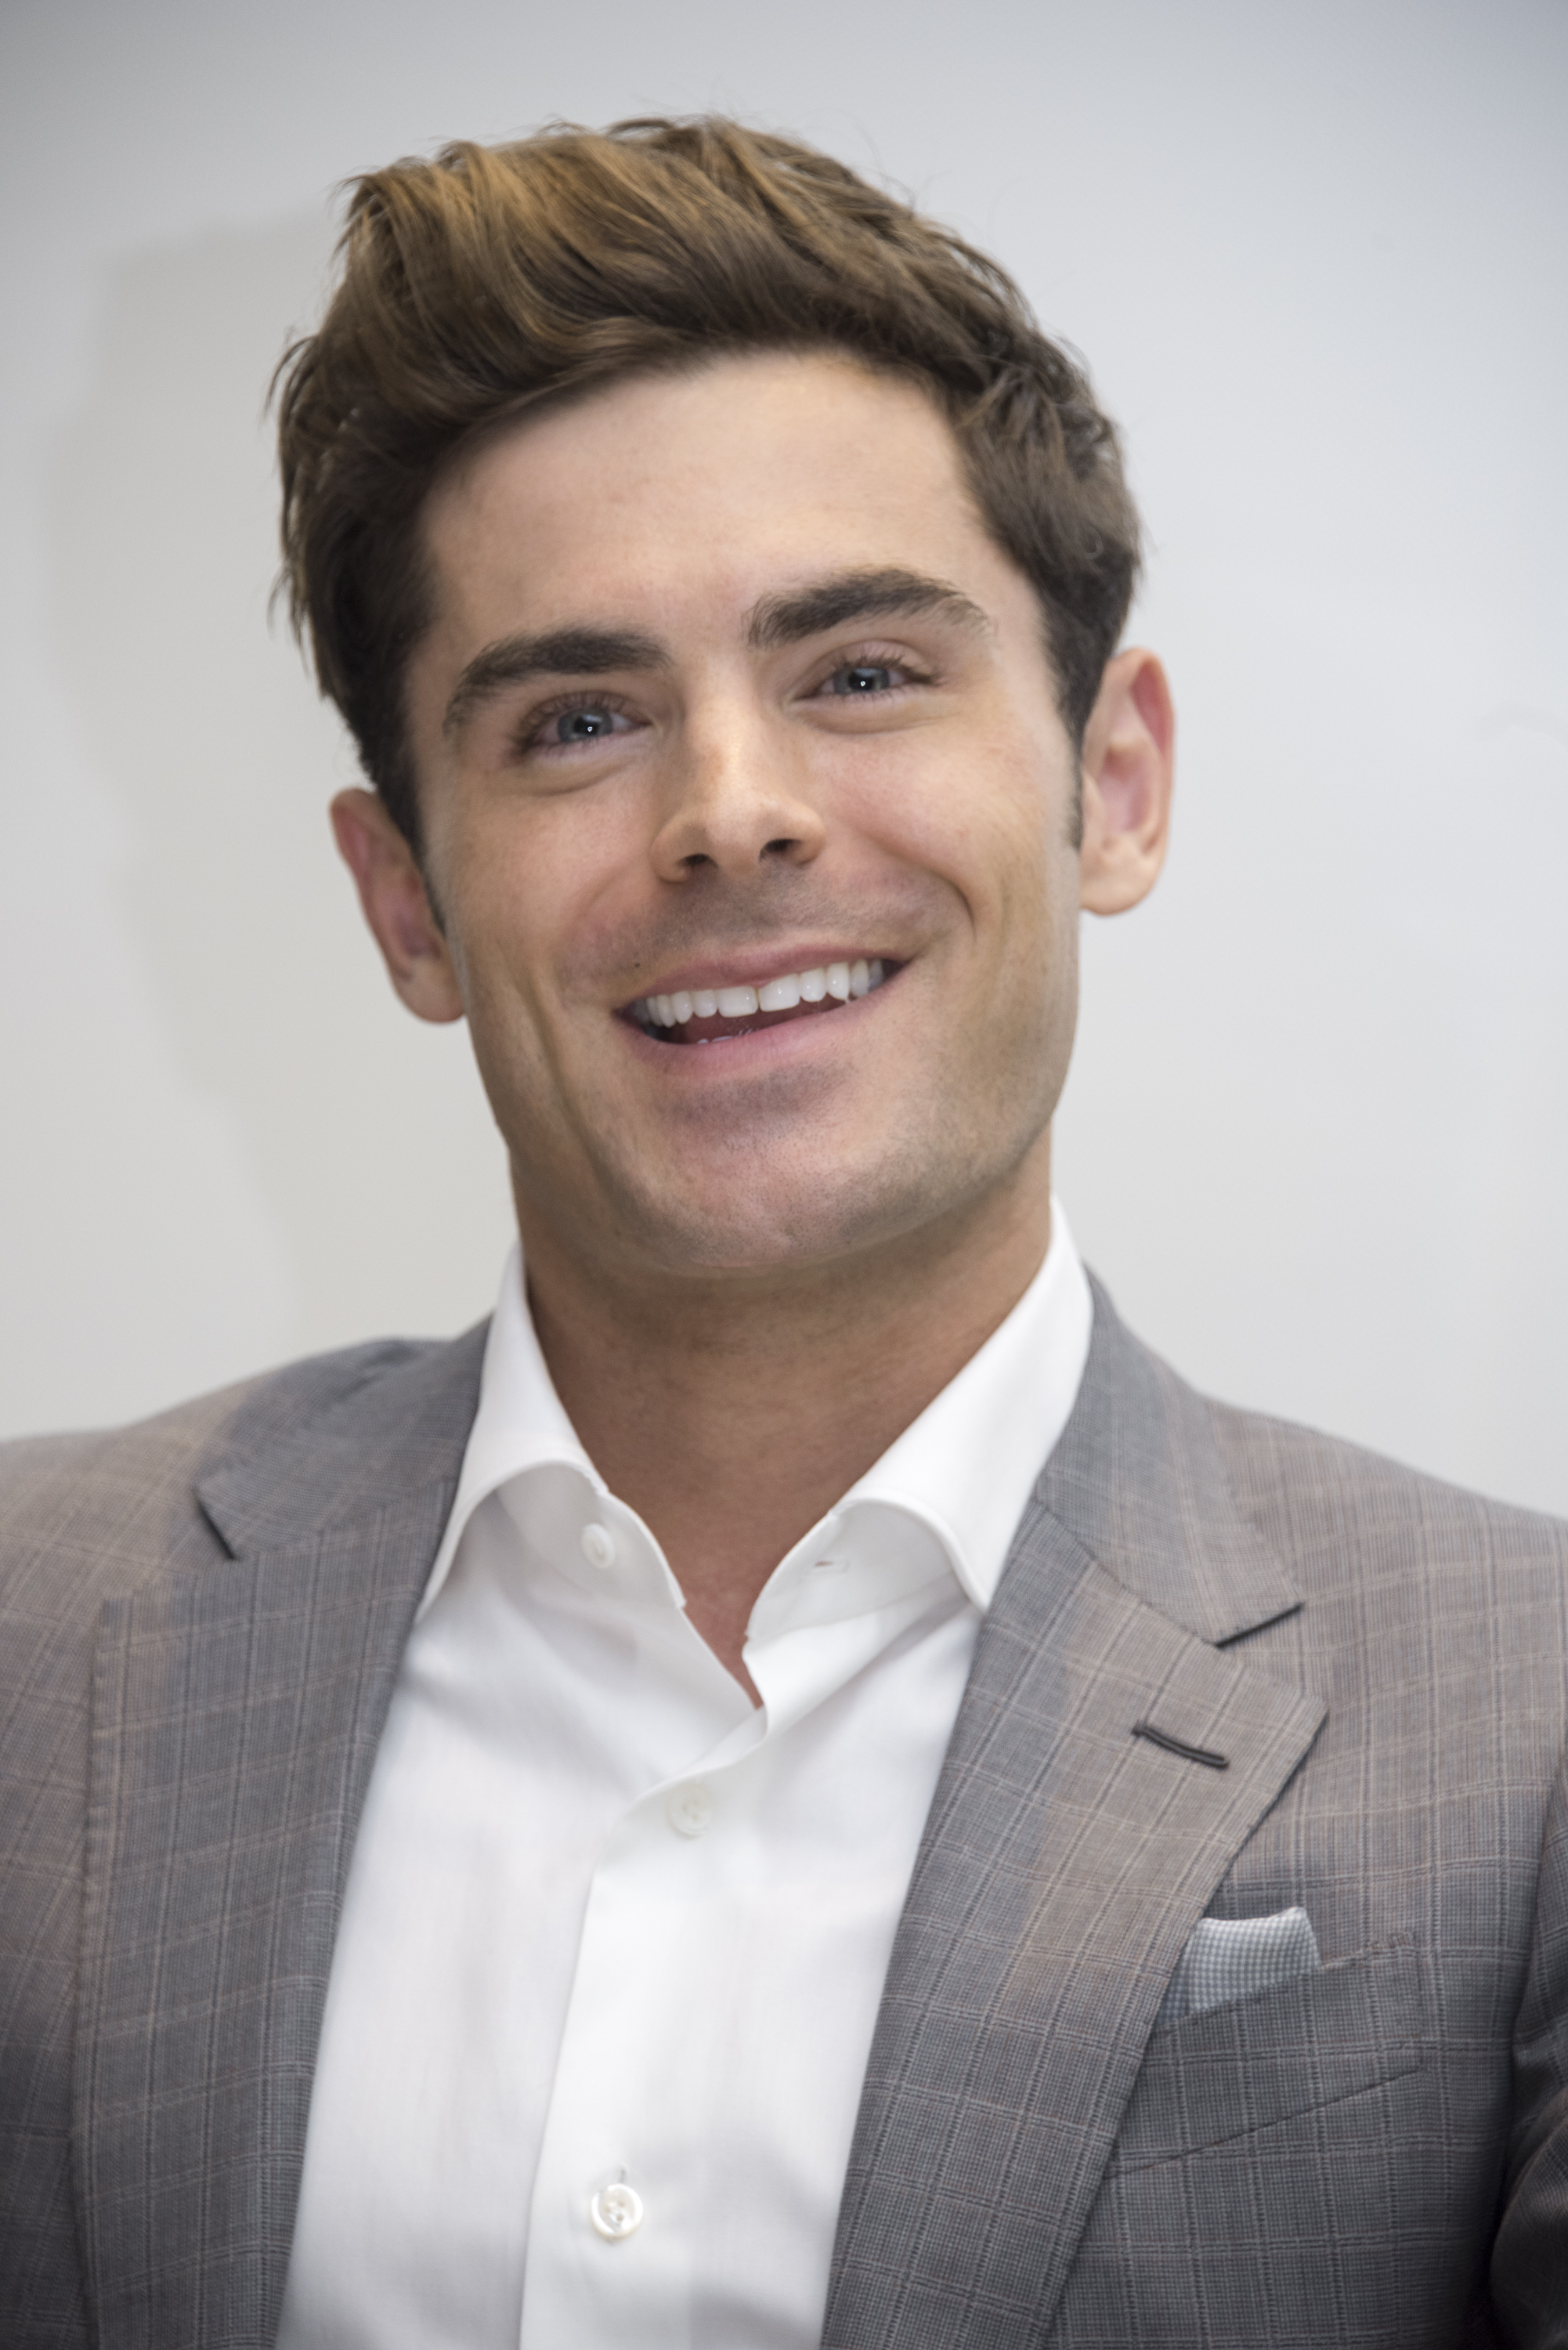 Zac Efron at a press conference for "The Greatest Showman" at the Four Seasons Hotel in Beverly Hills, California, on November 28, 2017 | Source: Getty Images